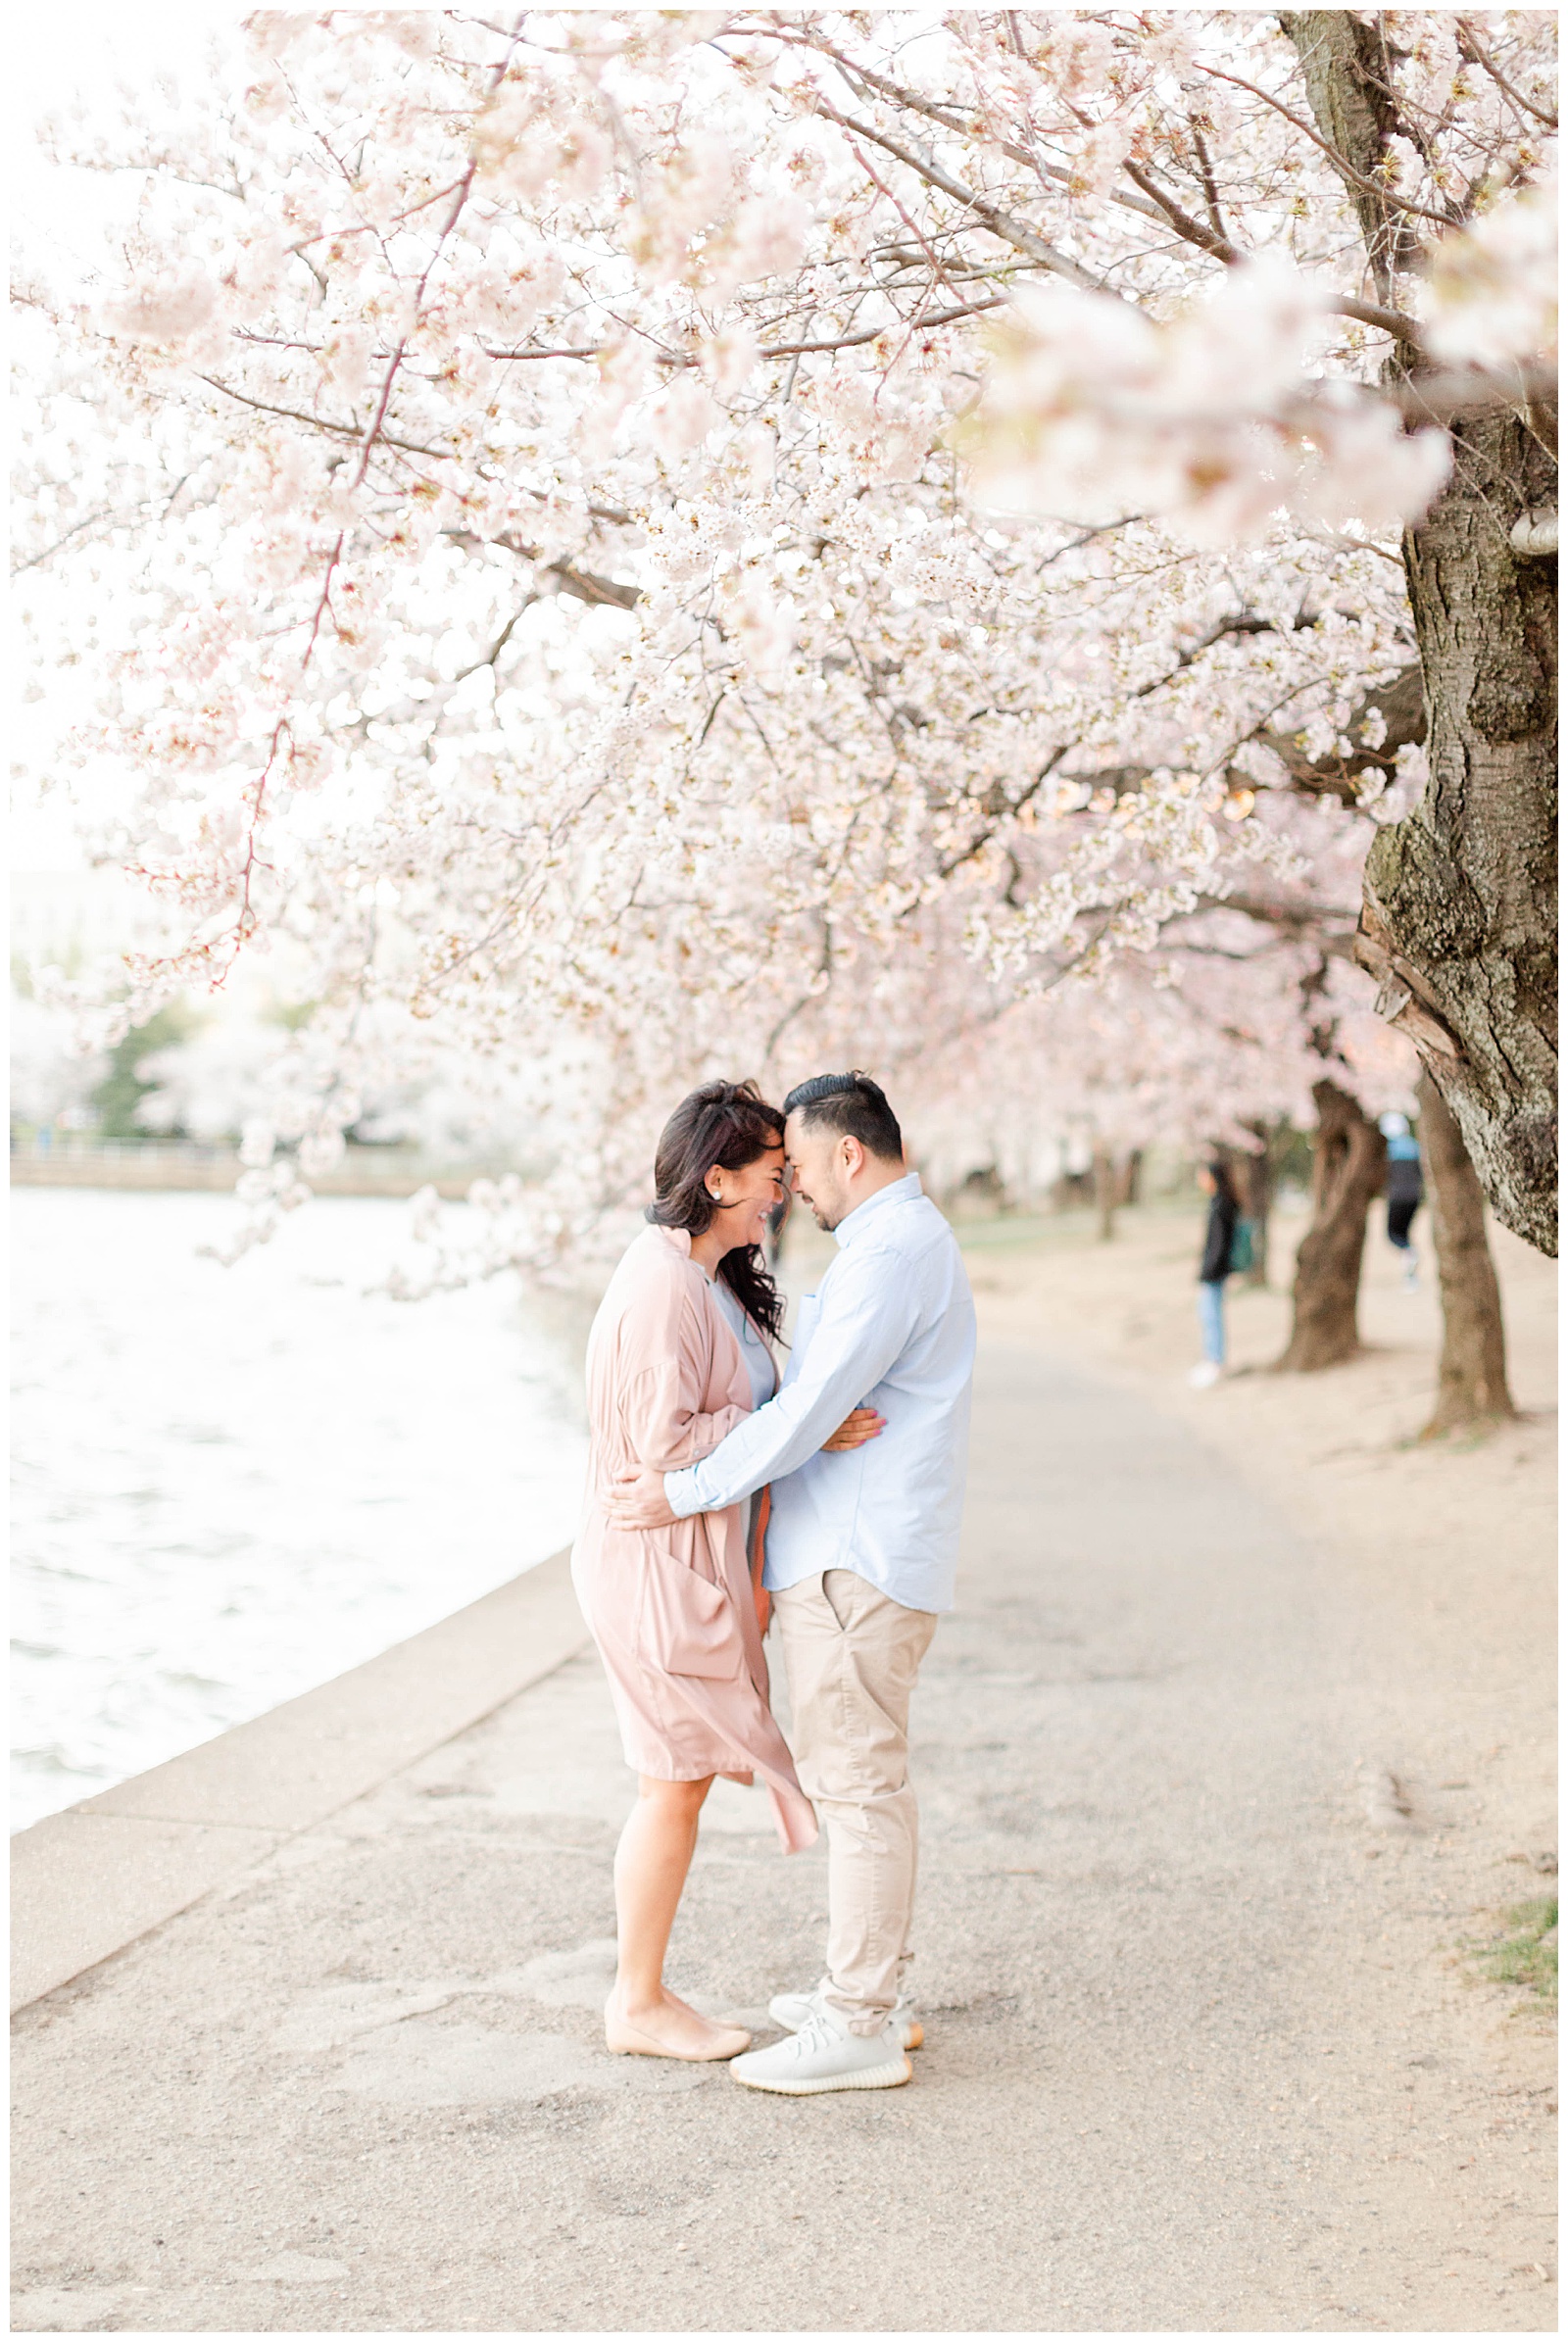 Couple standing next to Tidal Basin in Washington D.C with cherry blossom trees blooming in background.